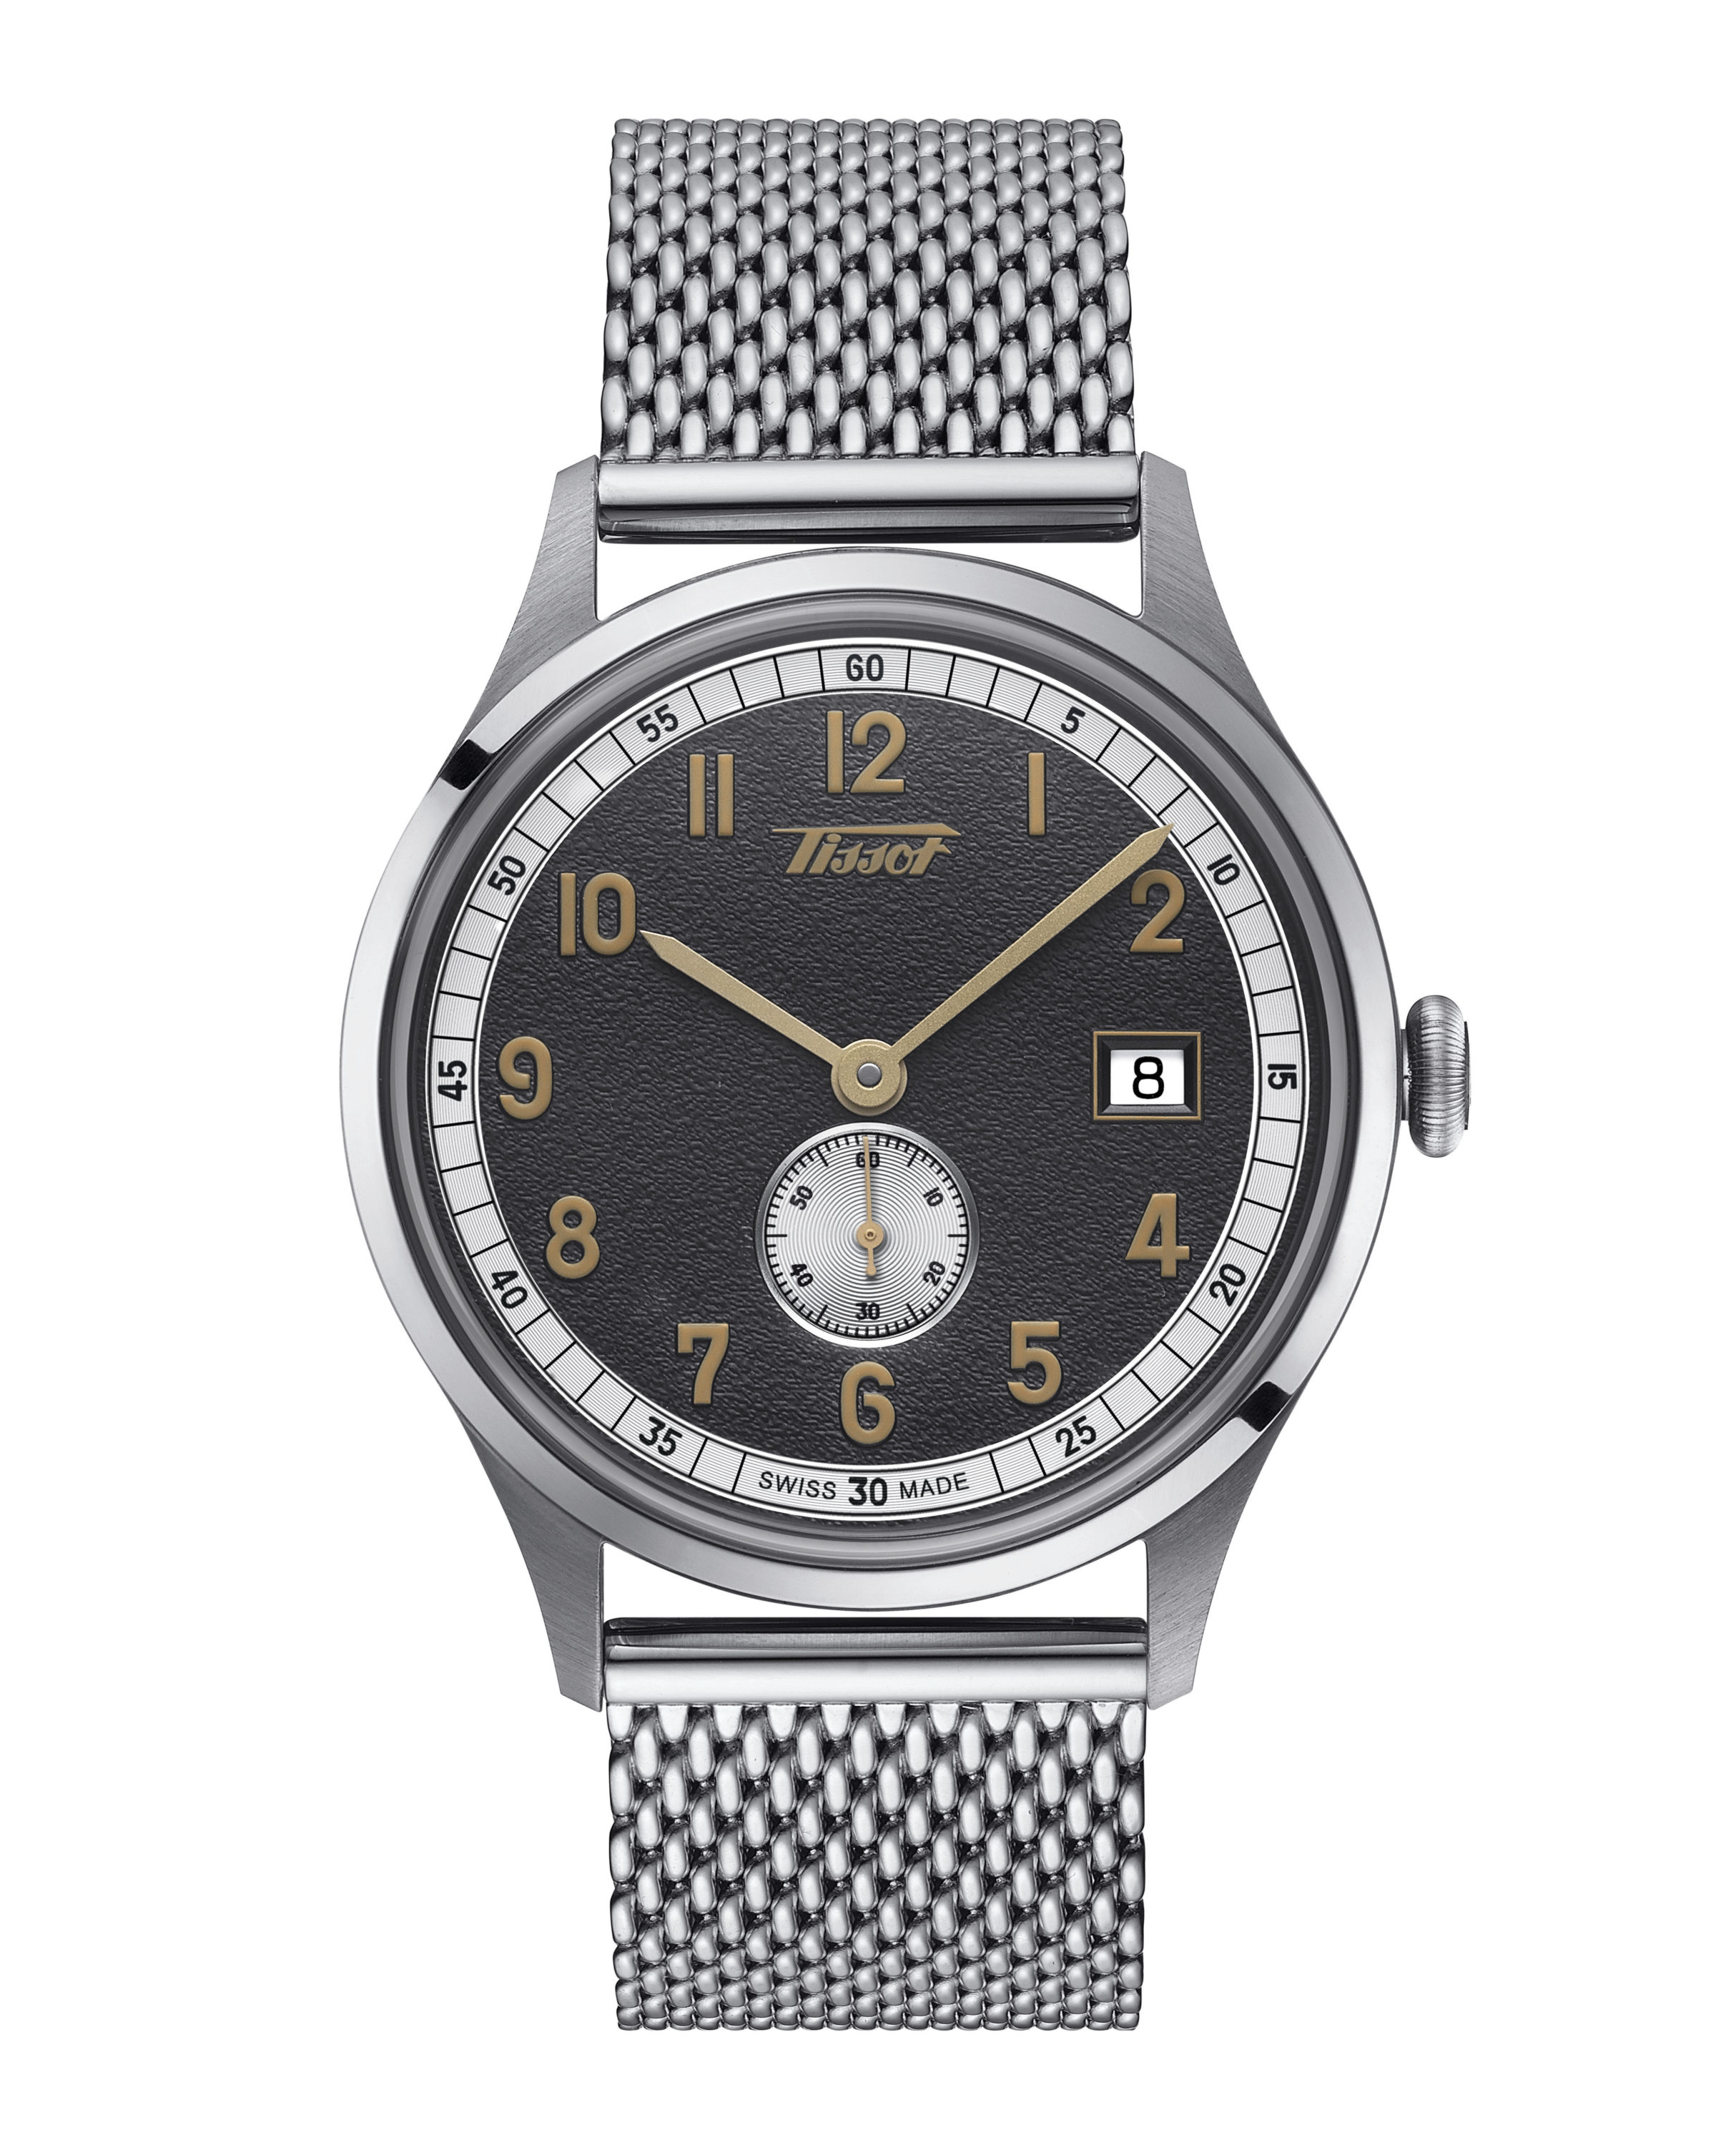 Introducing the Tissot Heritage 1938 Automatic COSC